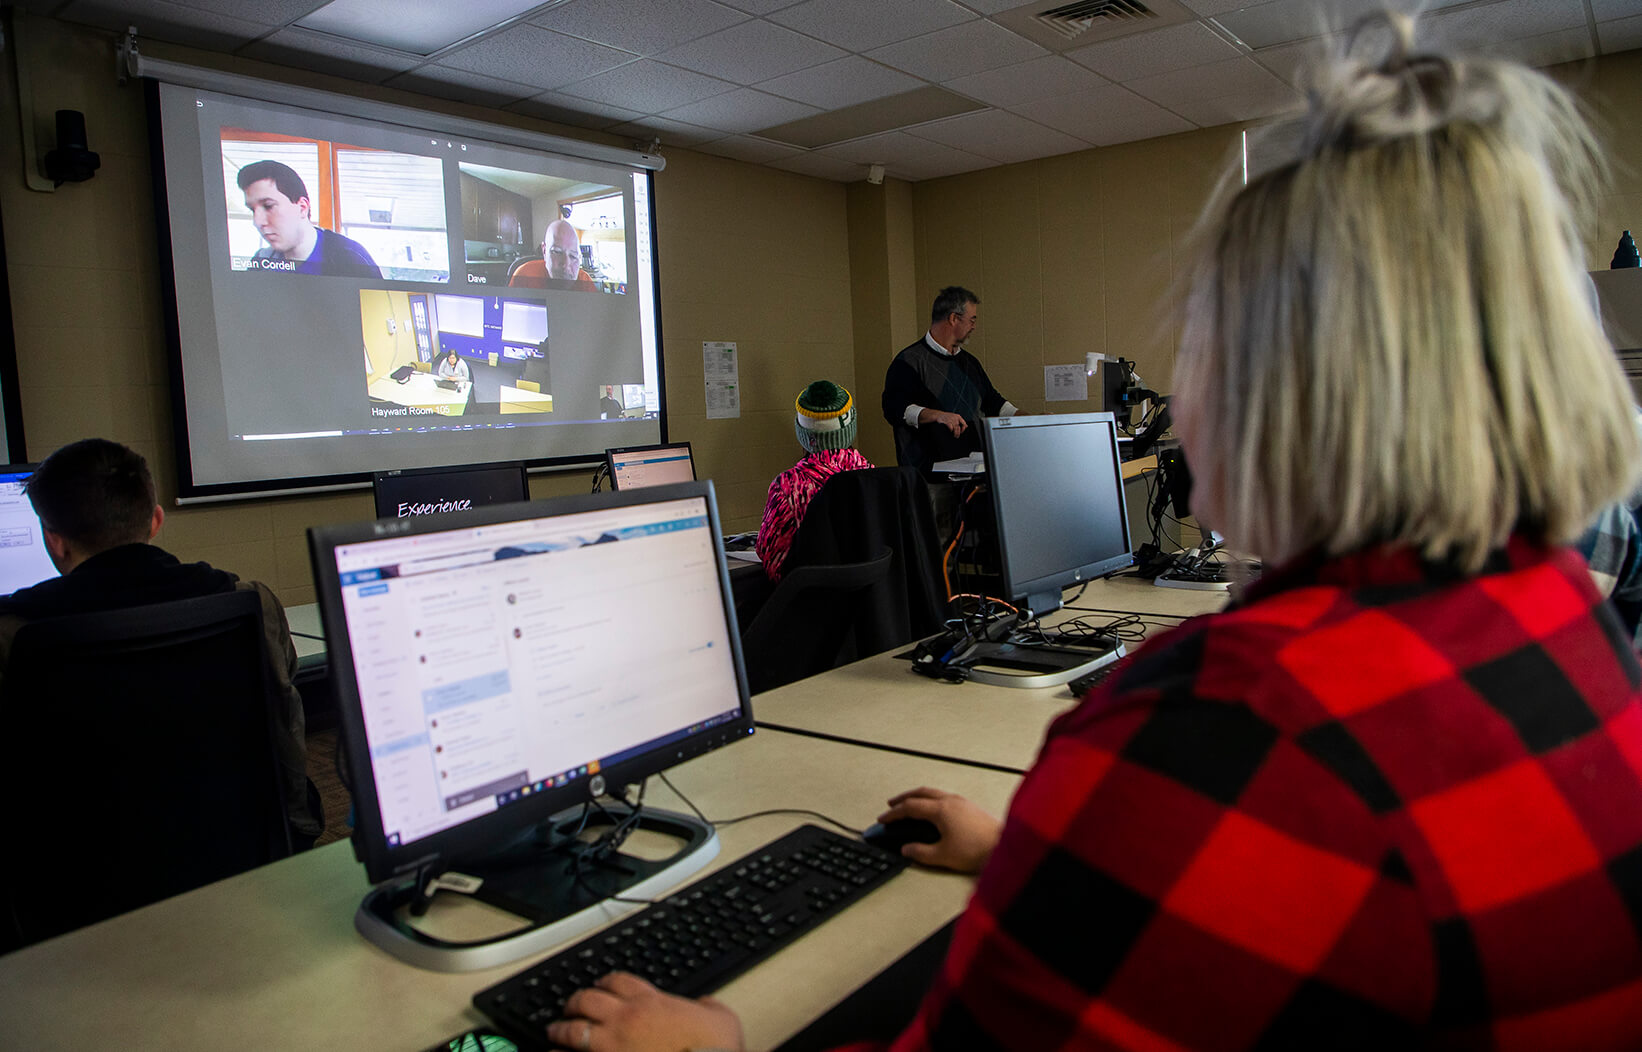 Students in a classroom and students virtually attending the same class